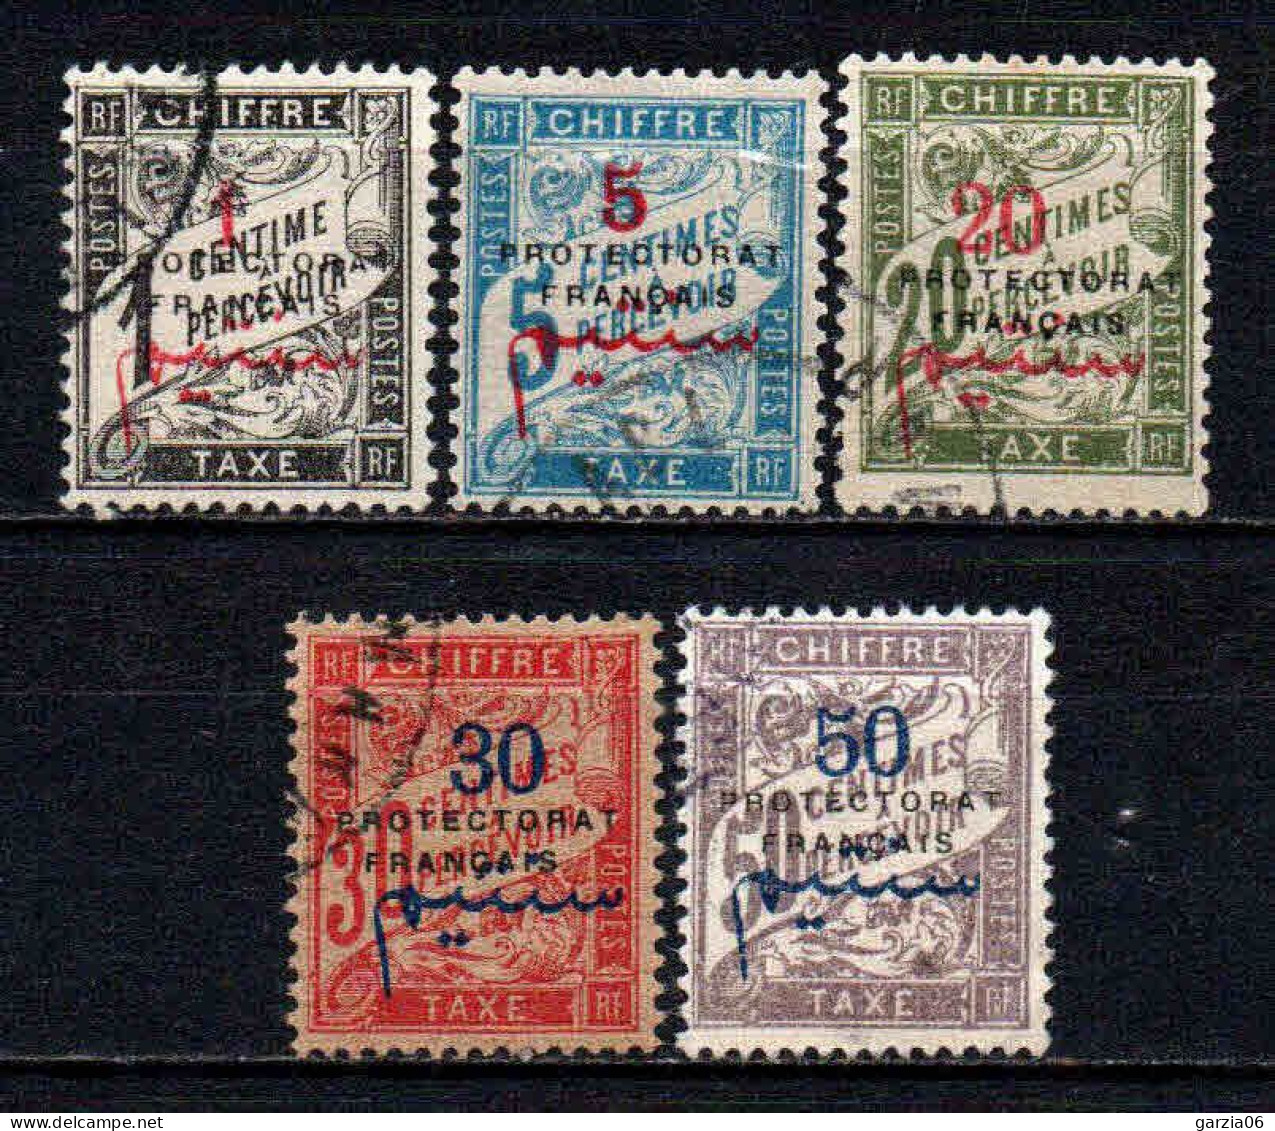 Maroc - 1915 - Timbres Taxe -  N° 17 à 22 Sauf 19 - Oblit - Used - Postage Due